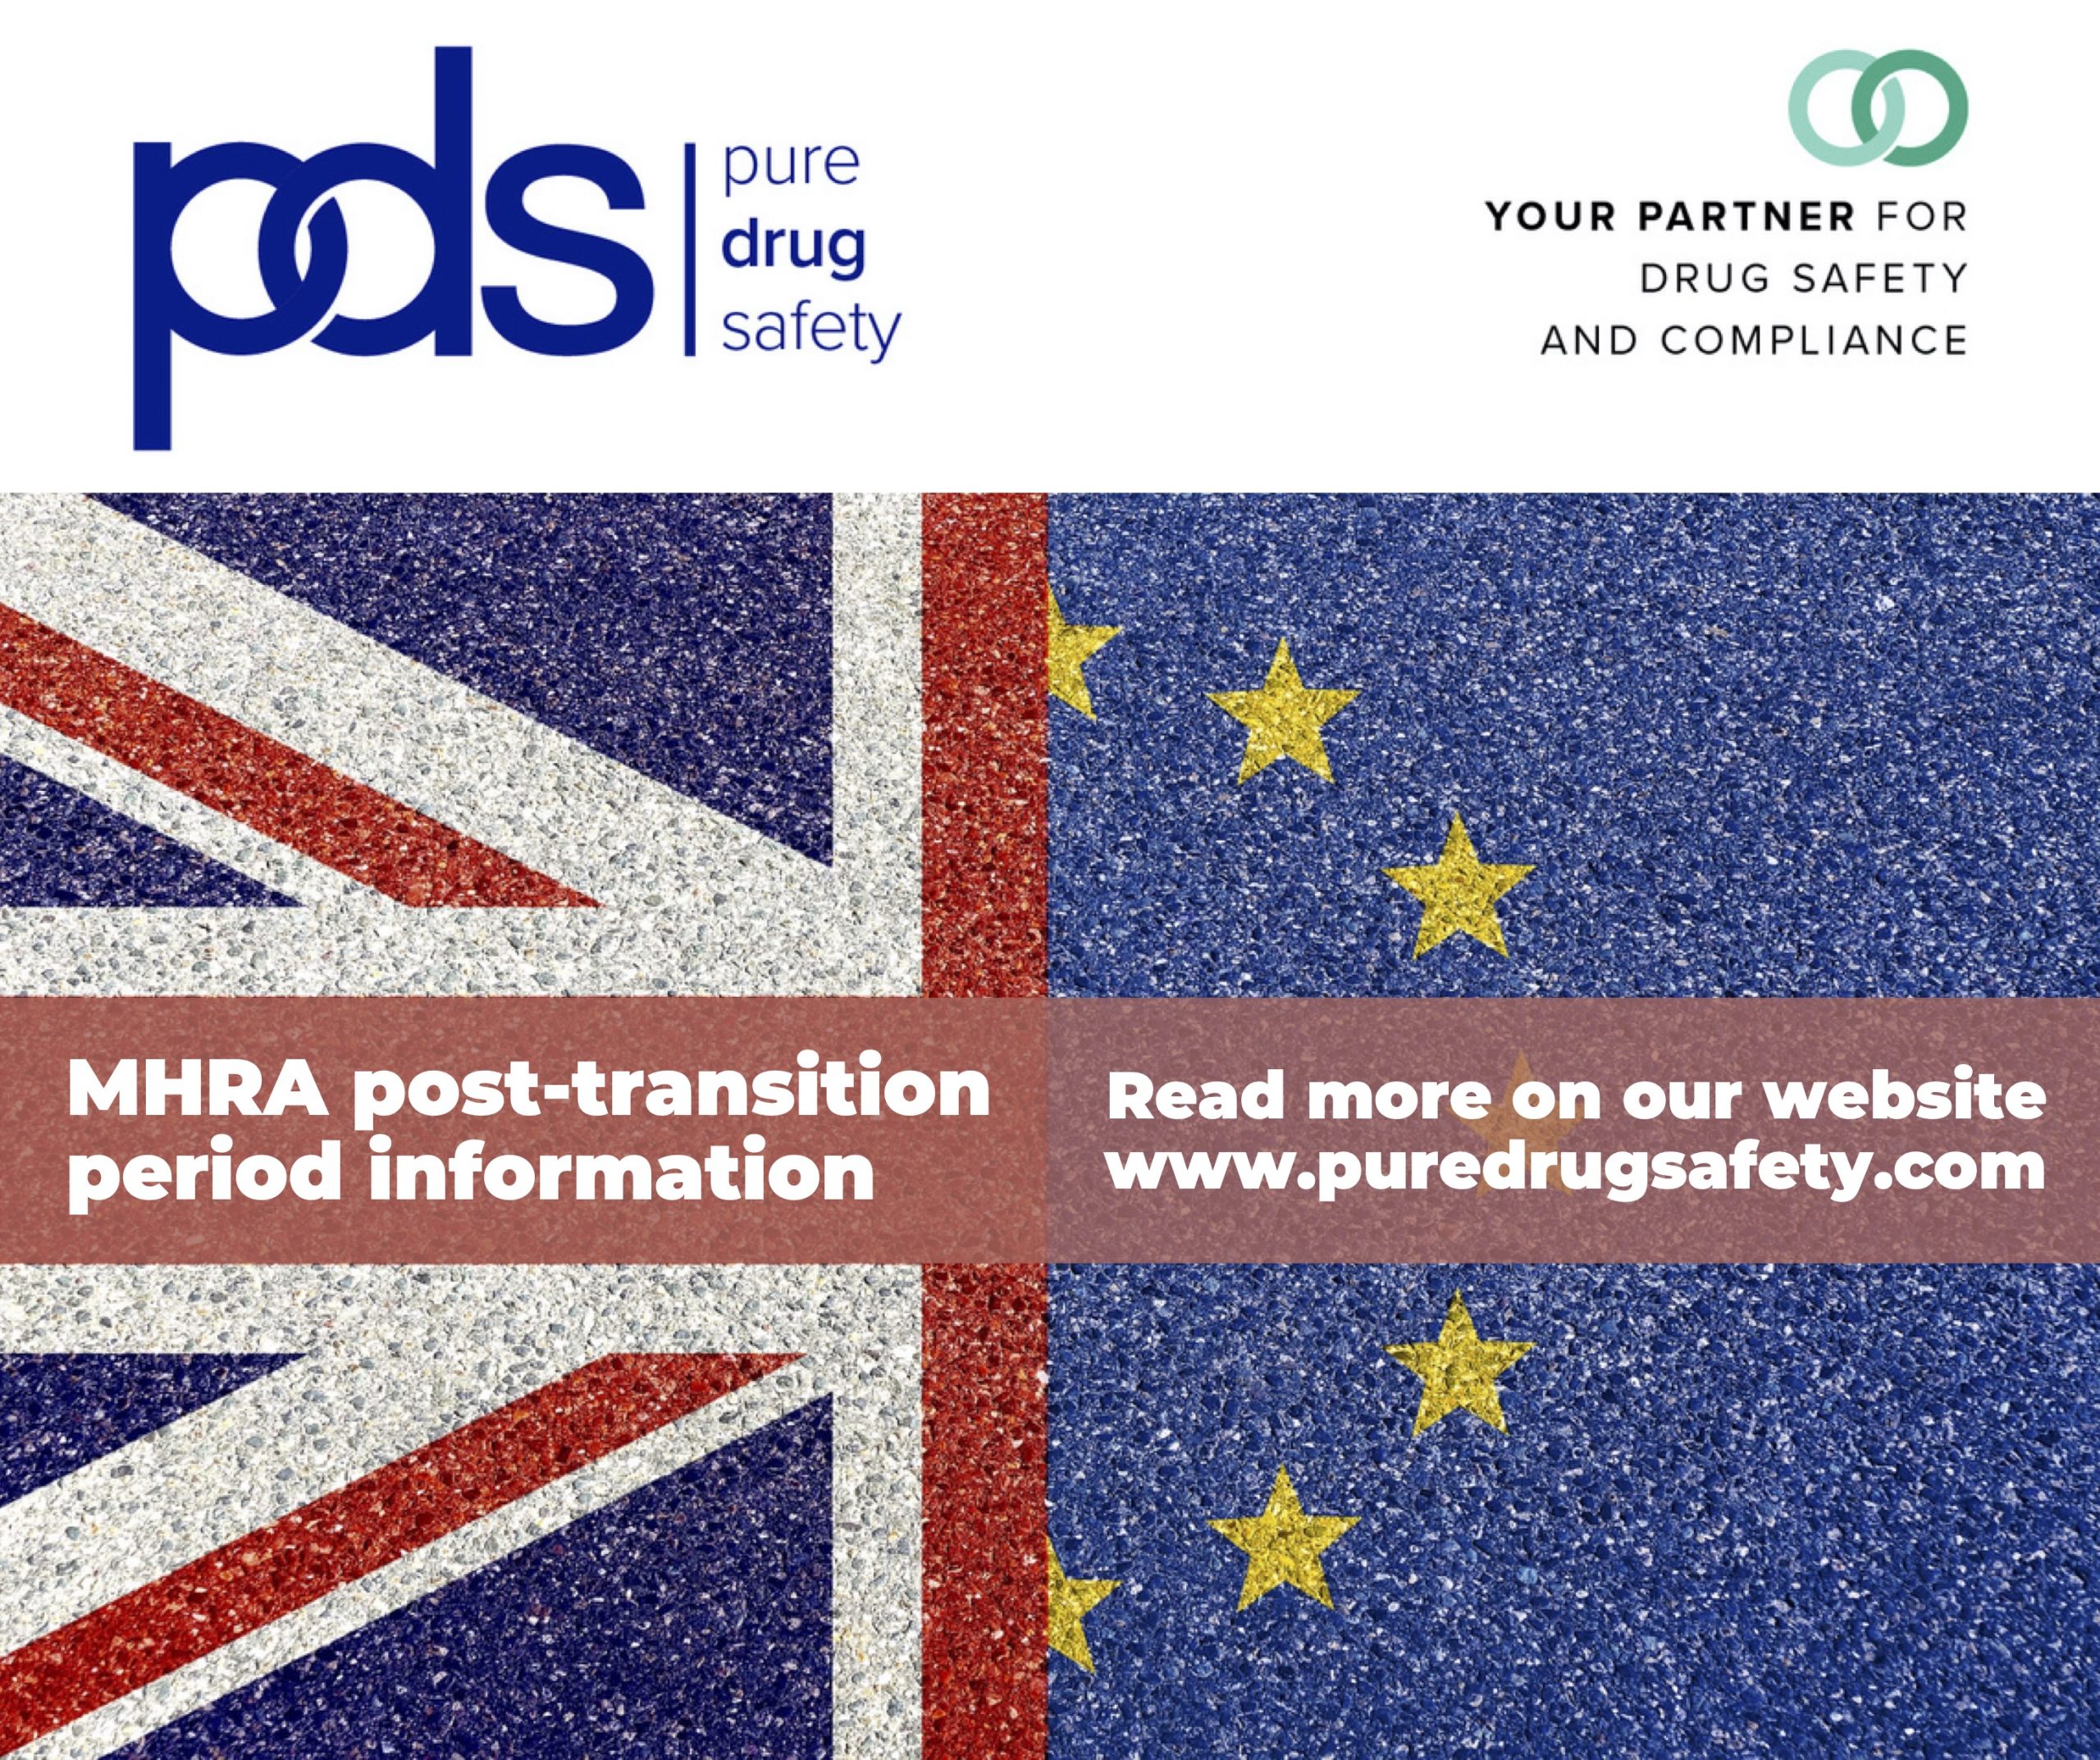 MHRA post-transition period information from Pure Drug Safety